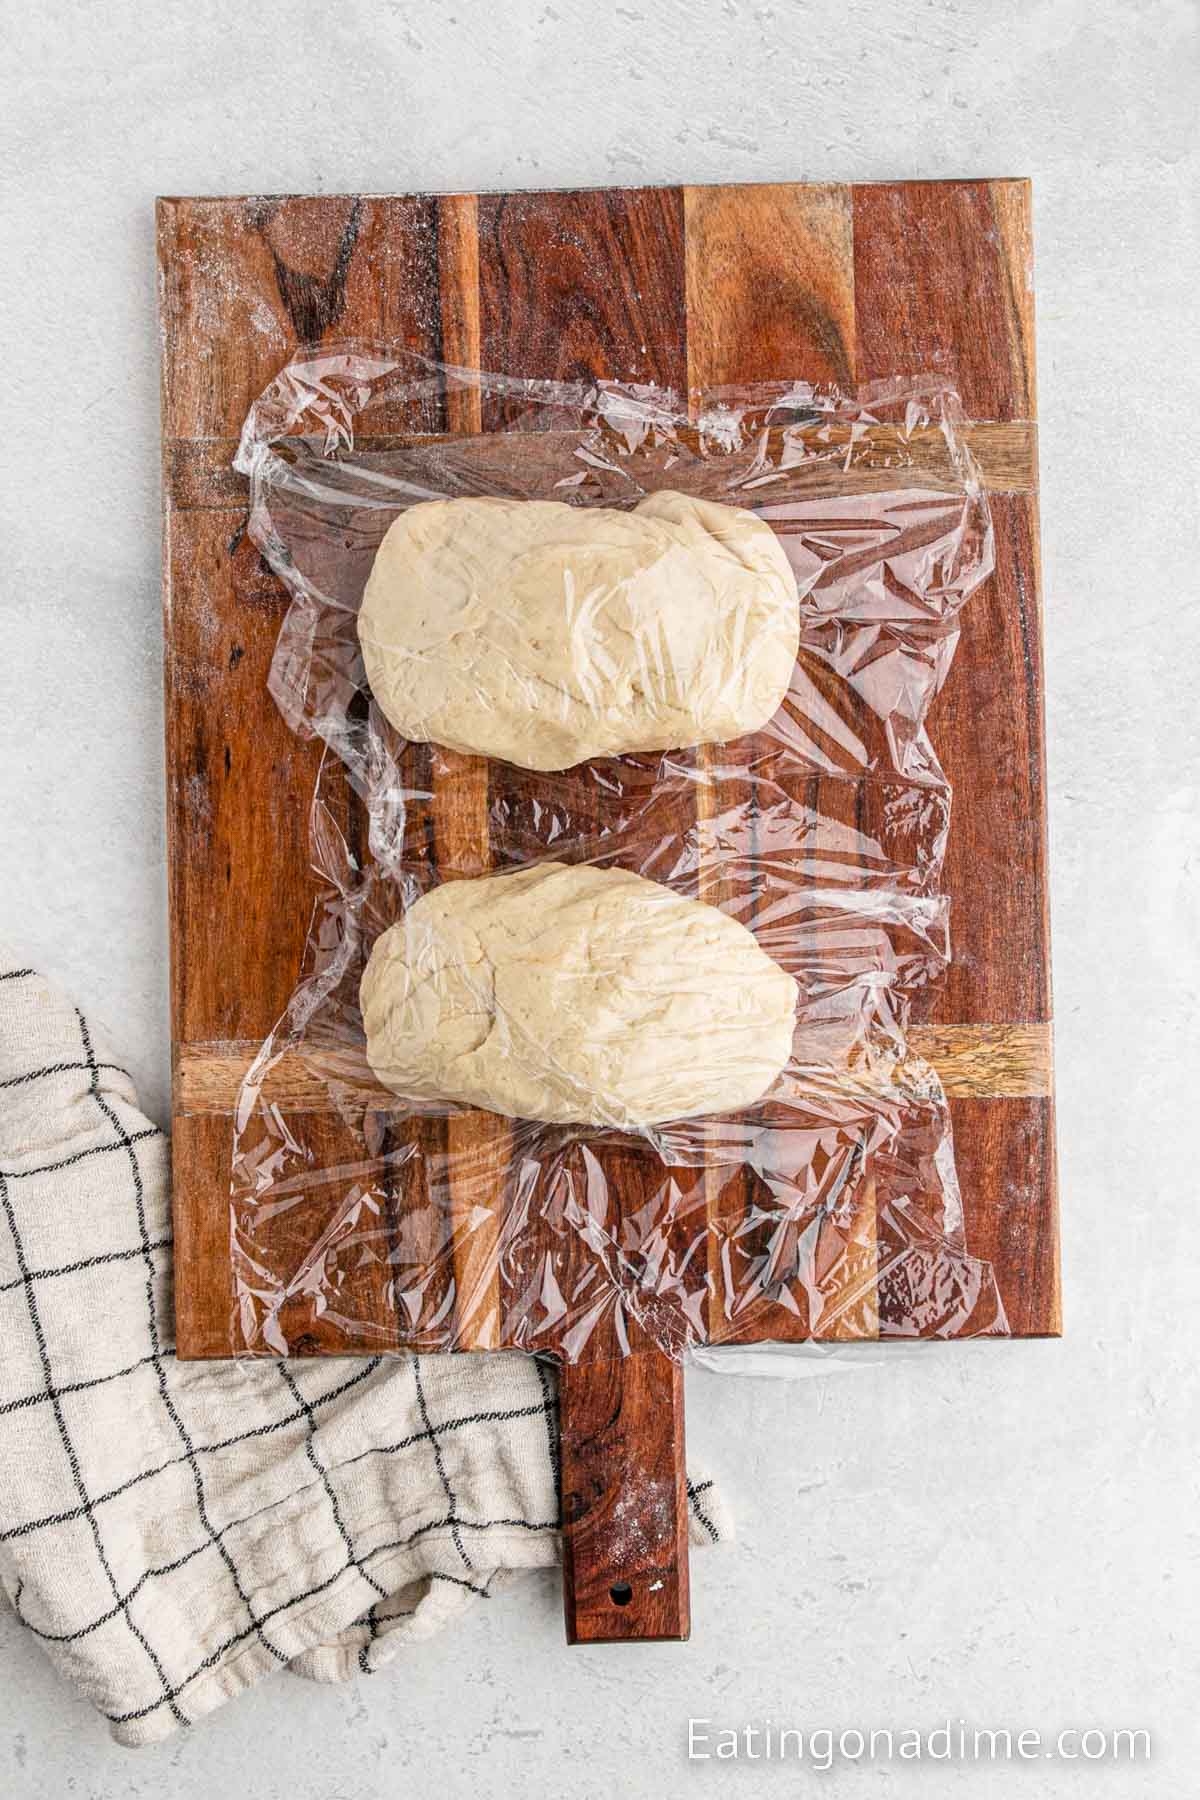 Covering the dough on a cutting board with plastic wrap